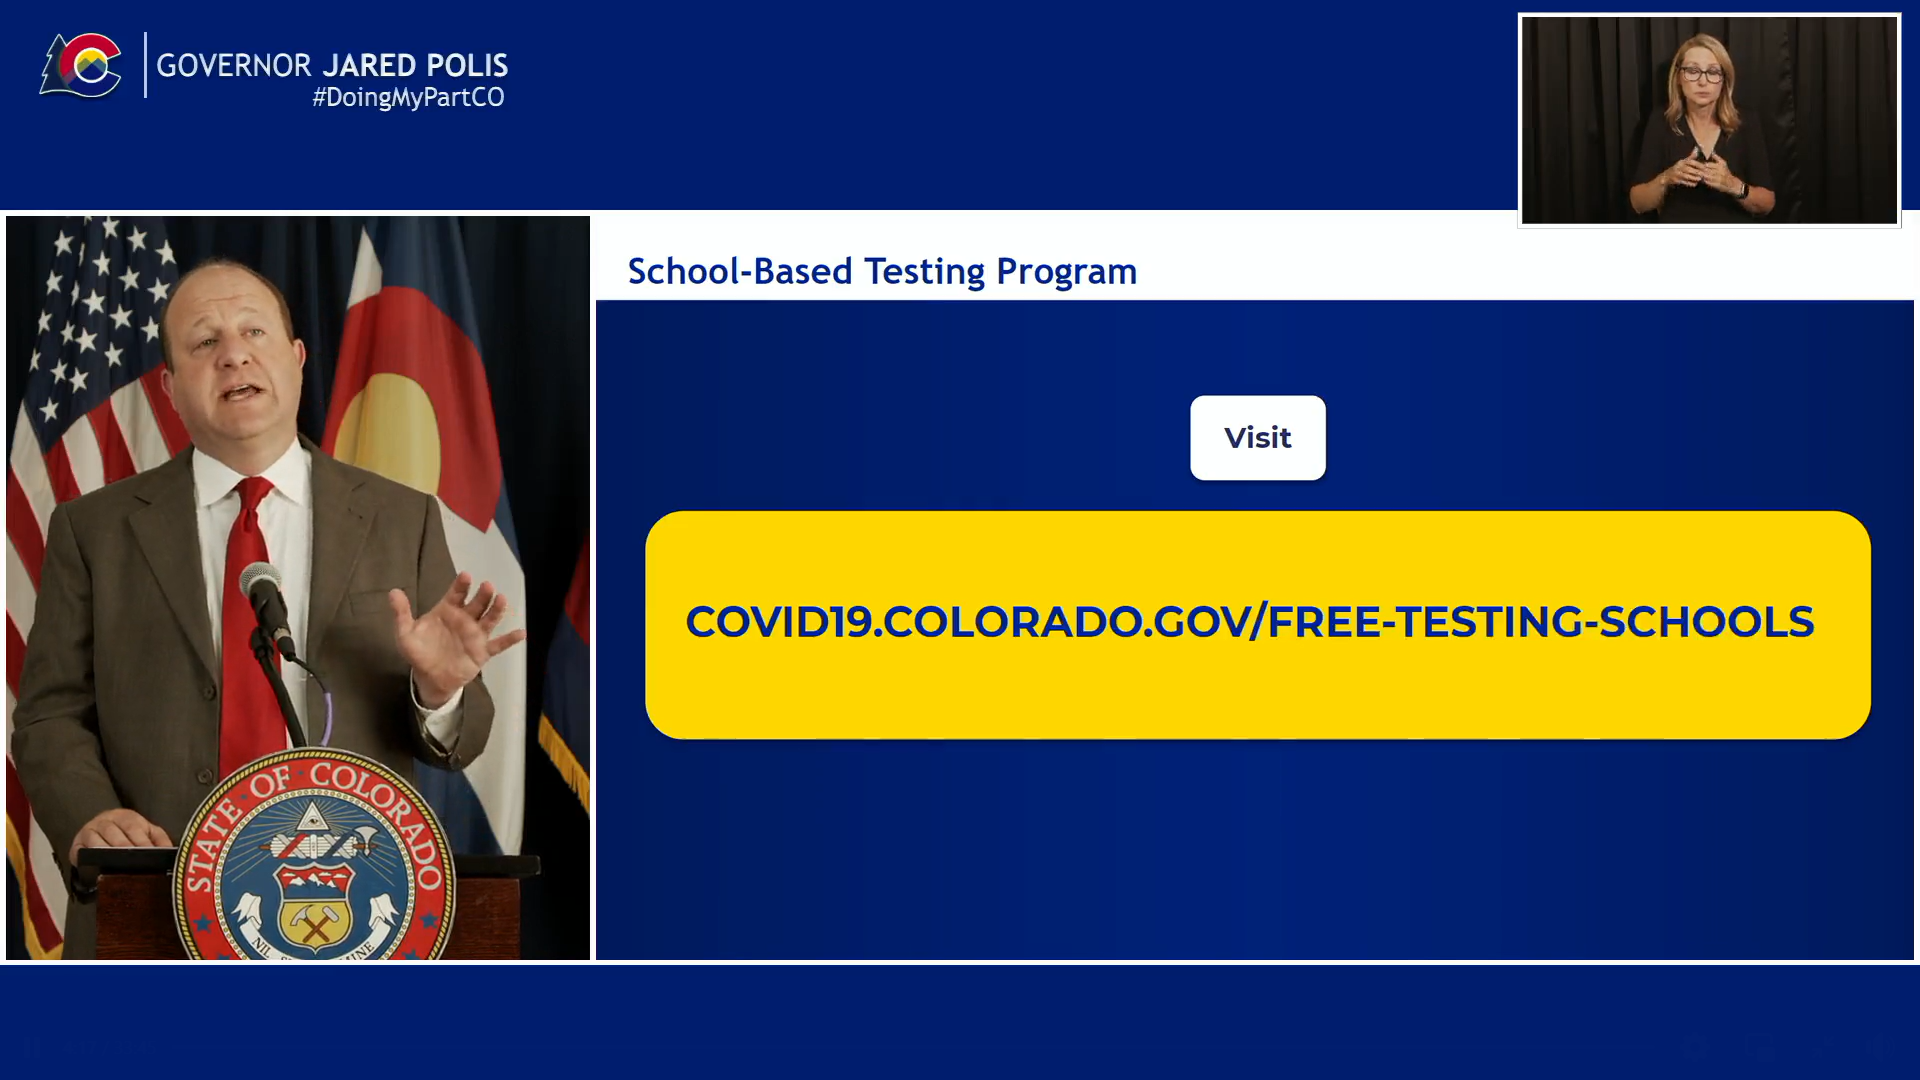 Governor Polis announces a new rapid-testing program that all Colorado schools can use to keep learning in person this year. He forgoes a universal mask mandate in schools and leaves it up to local districts to decide. 